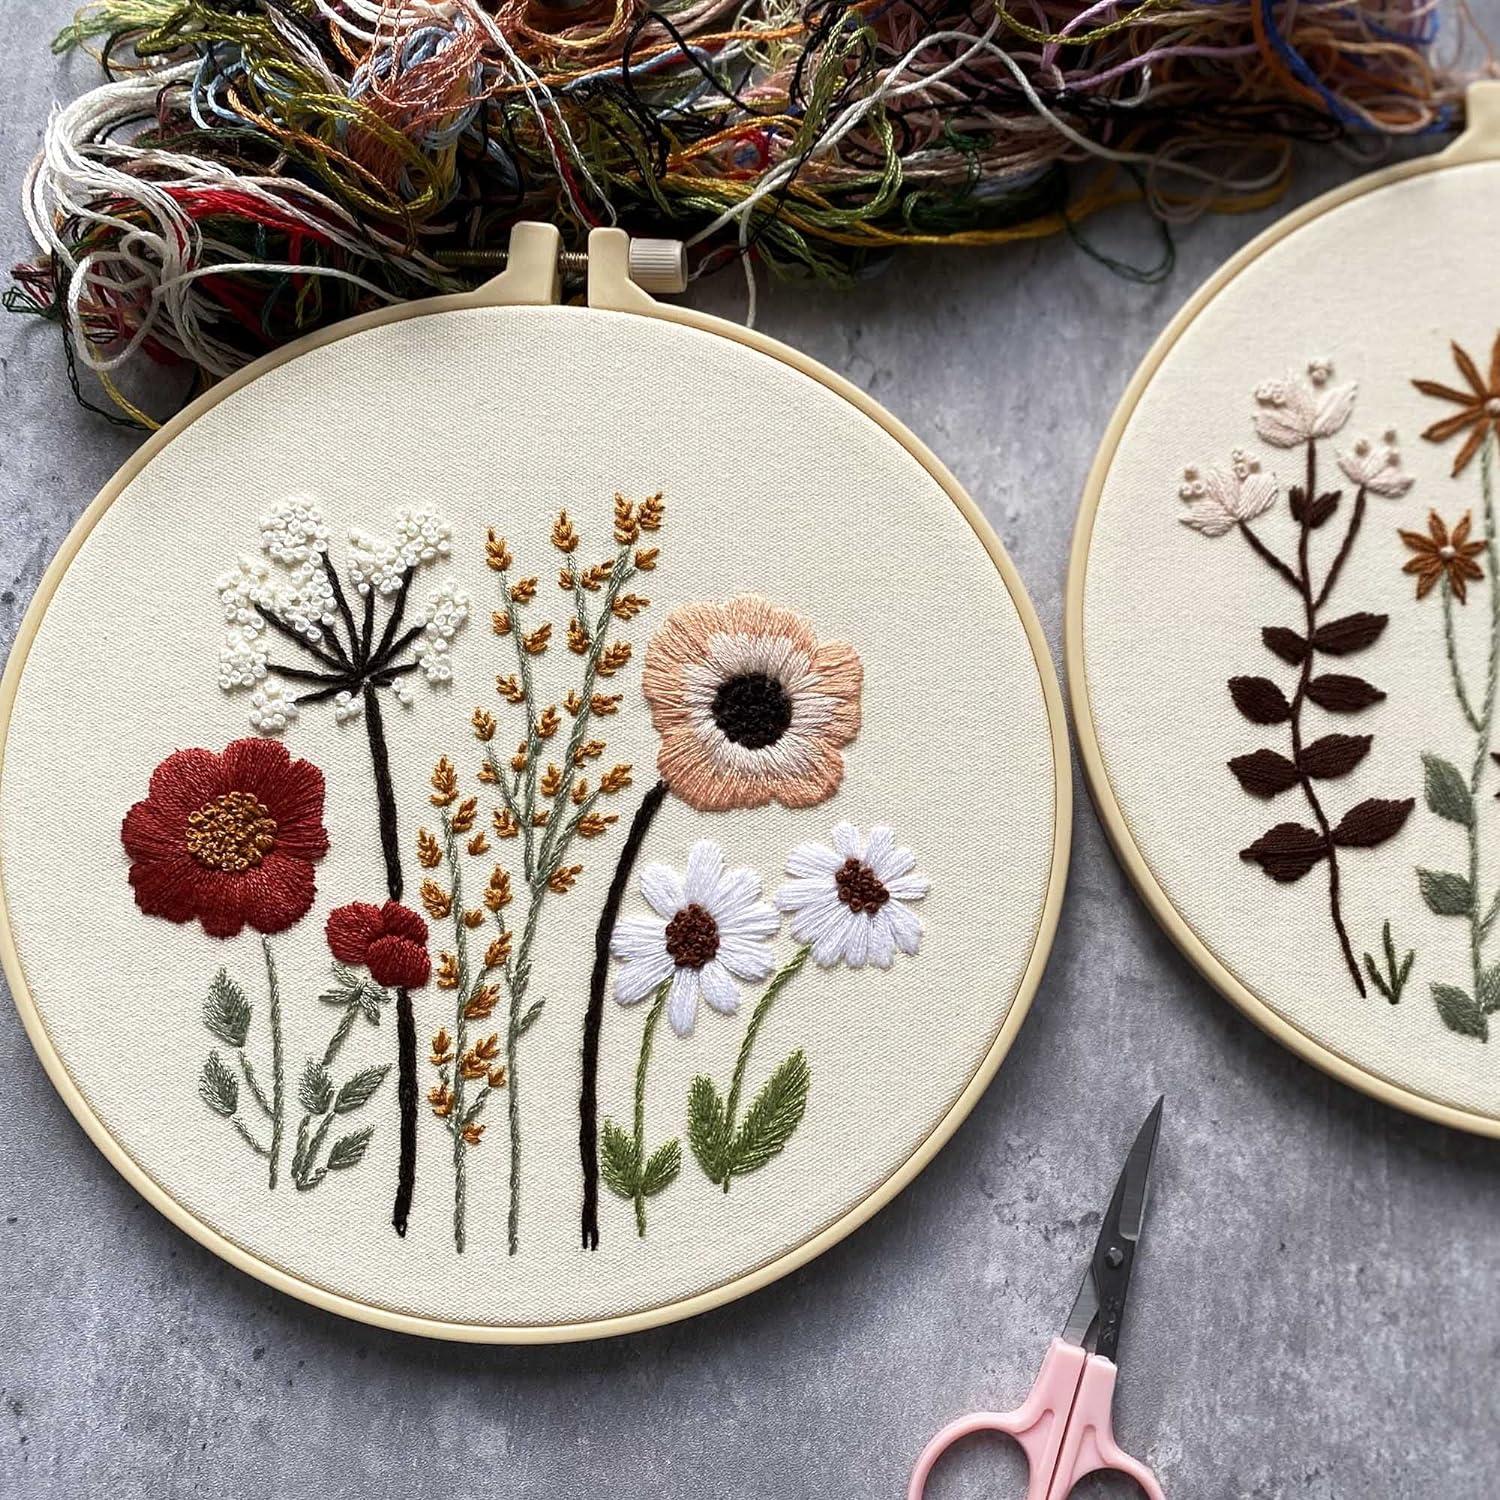 Harimau 3 Pack Embroidery Kit for Beginners Floral Plant Pattern Cross  Stitch Kits Set Including Stamped Embroidery Cloth with 3 Embroidery Hoops  Color Threads and Tools (Flower) stone